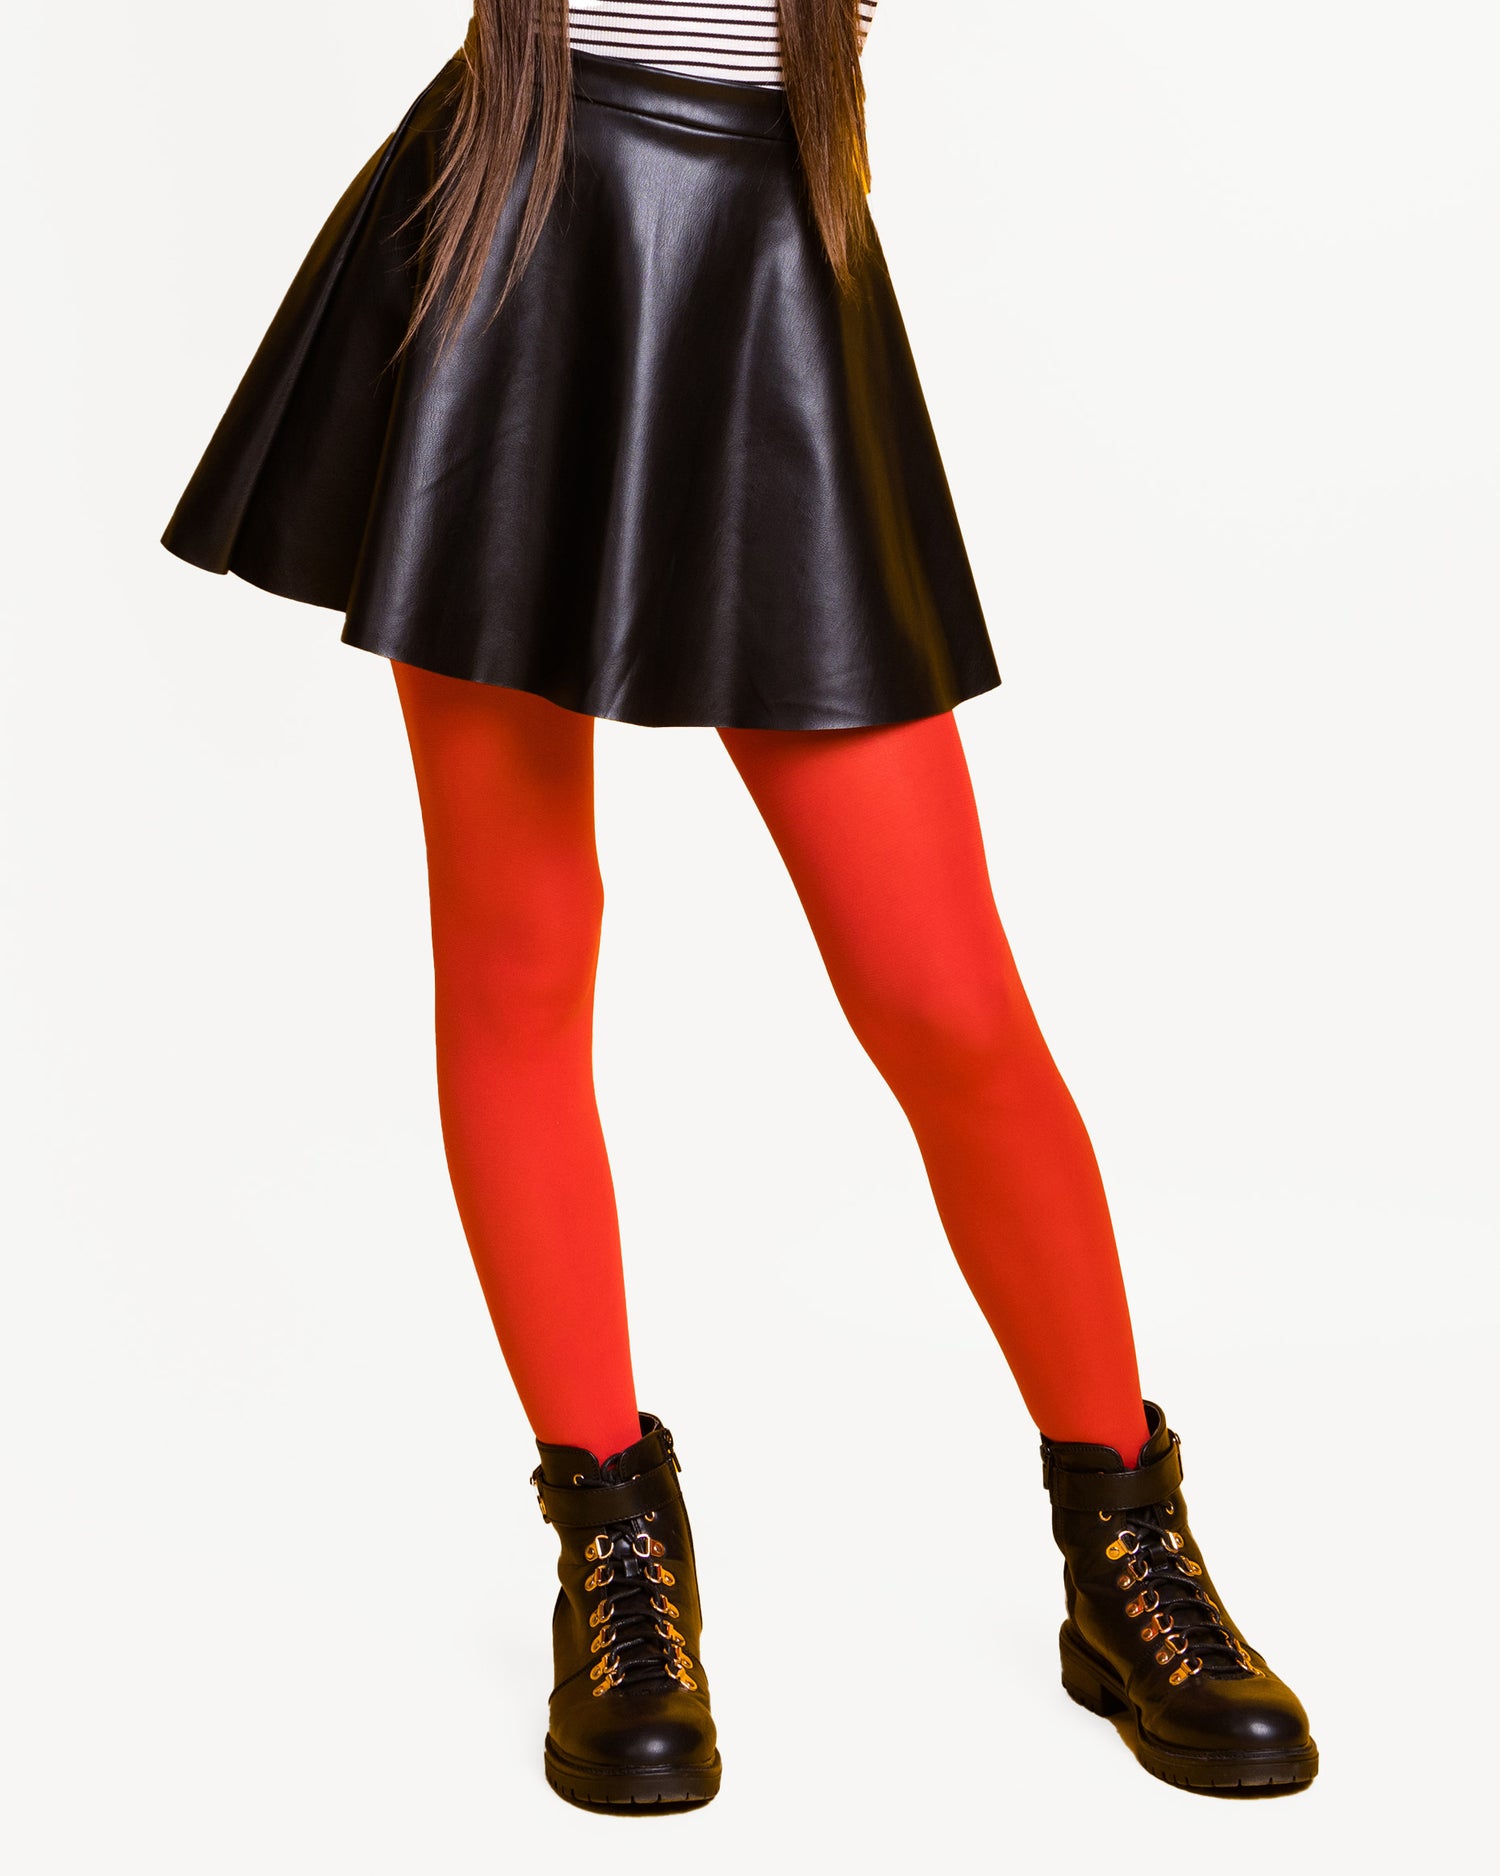 Girl wearing a faux leather skater skirt, white top with black stripes, red tights and black ankle boots.